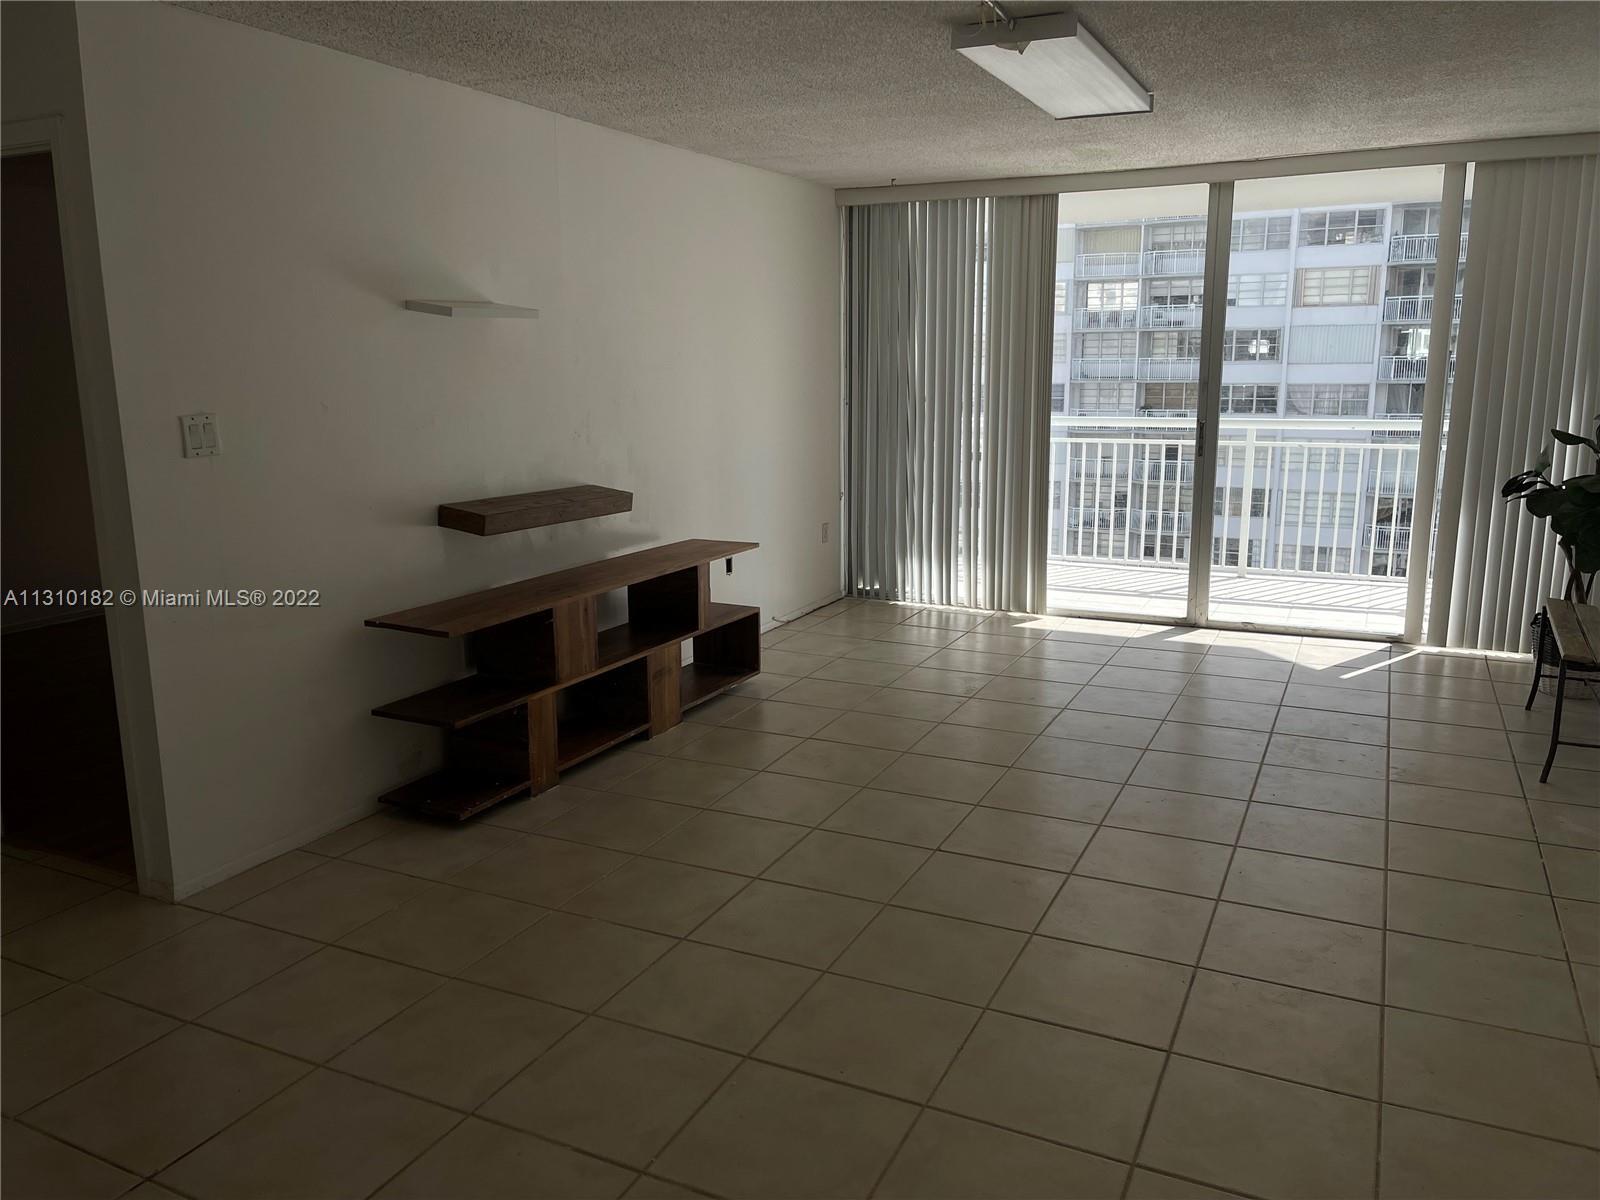 SPACIOUS 1 BED 1 1/2 BATHS UNIT IN ORIGINAL IMMACULATE CONDITION. CERAMIC TILE FLOOR THROUGHOUT, WAT